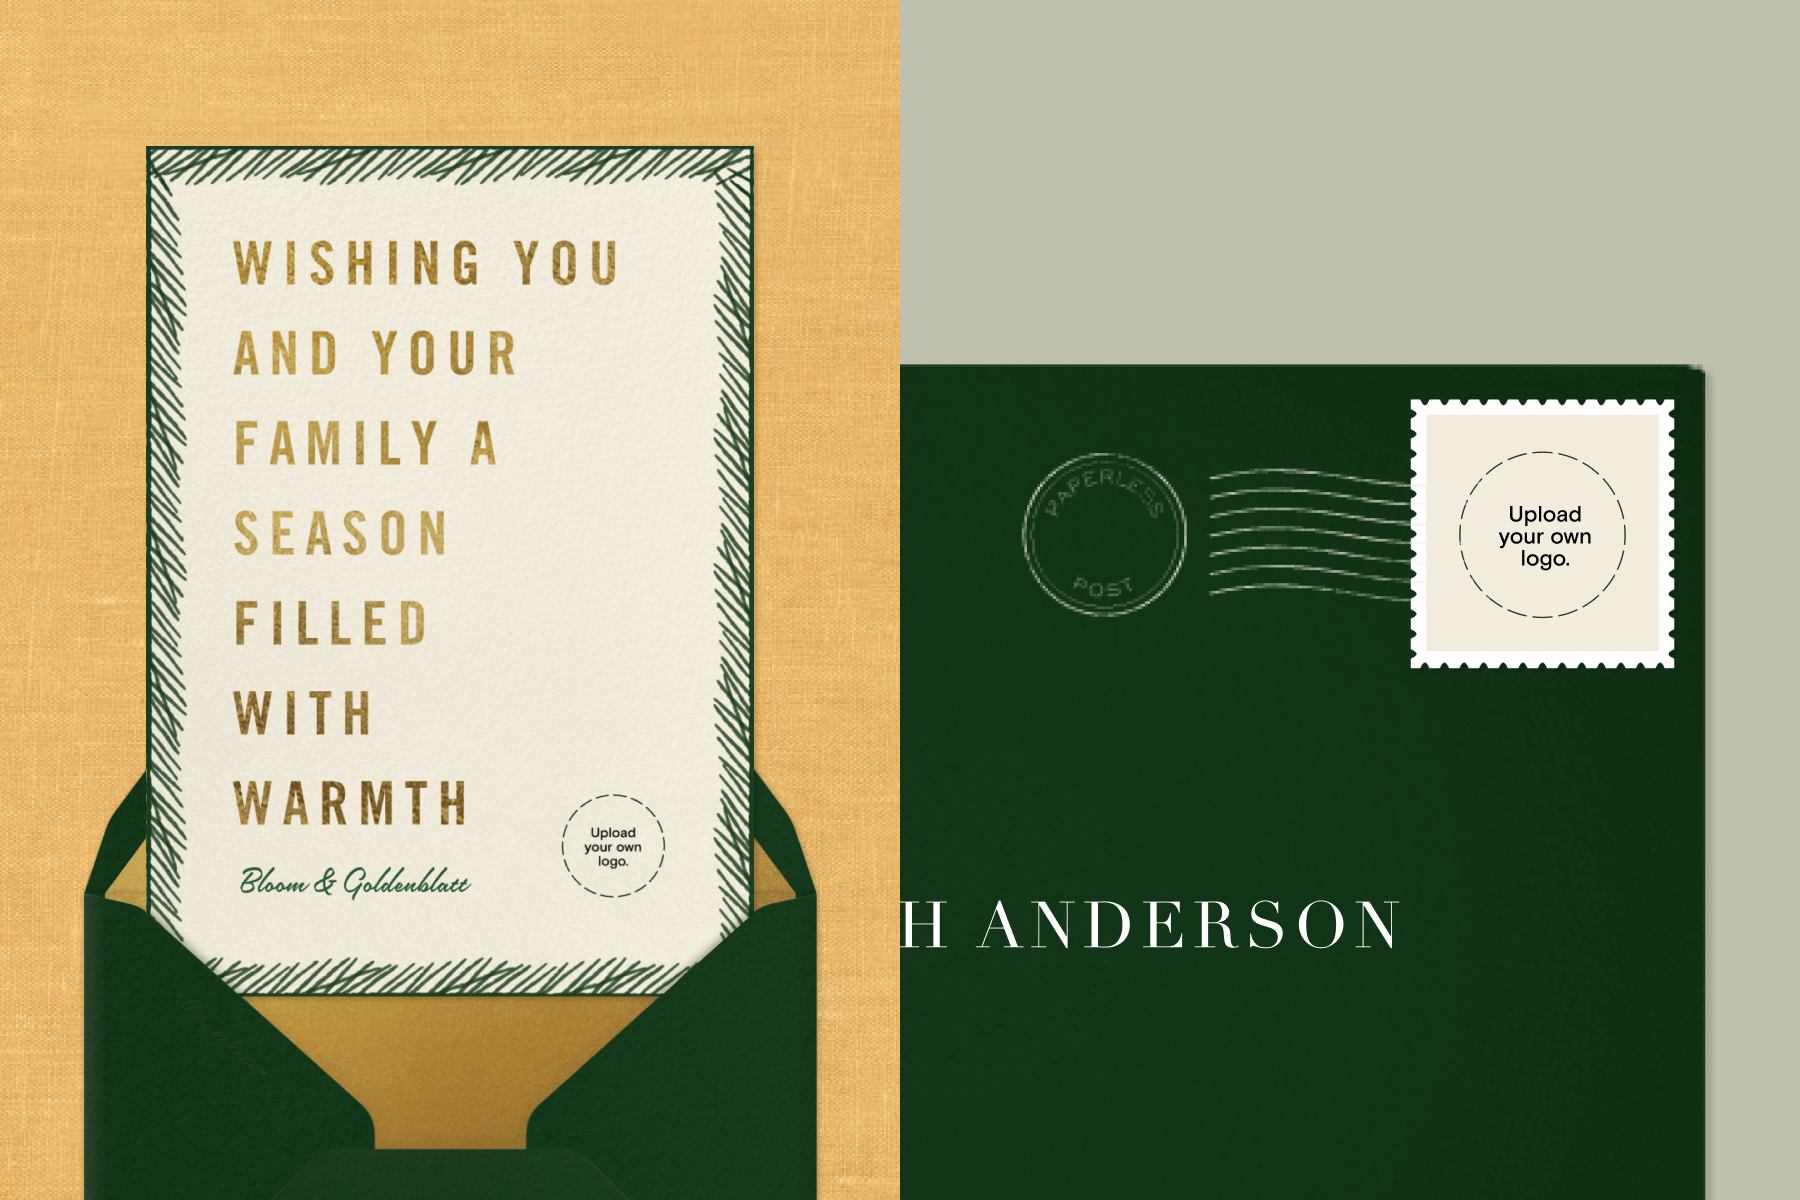 A holiday card with gold block lettering and a simple border resembling pine needles; A stamp on an envelope with a message to upload your own logo.